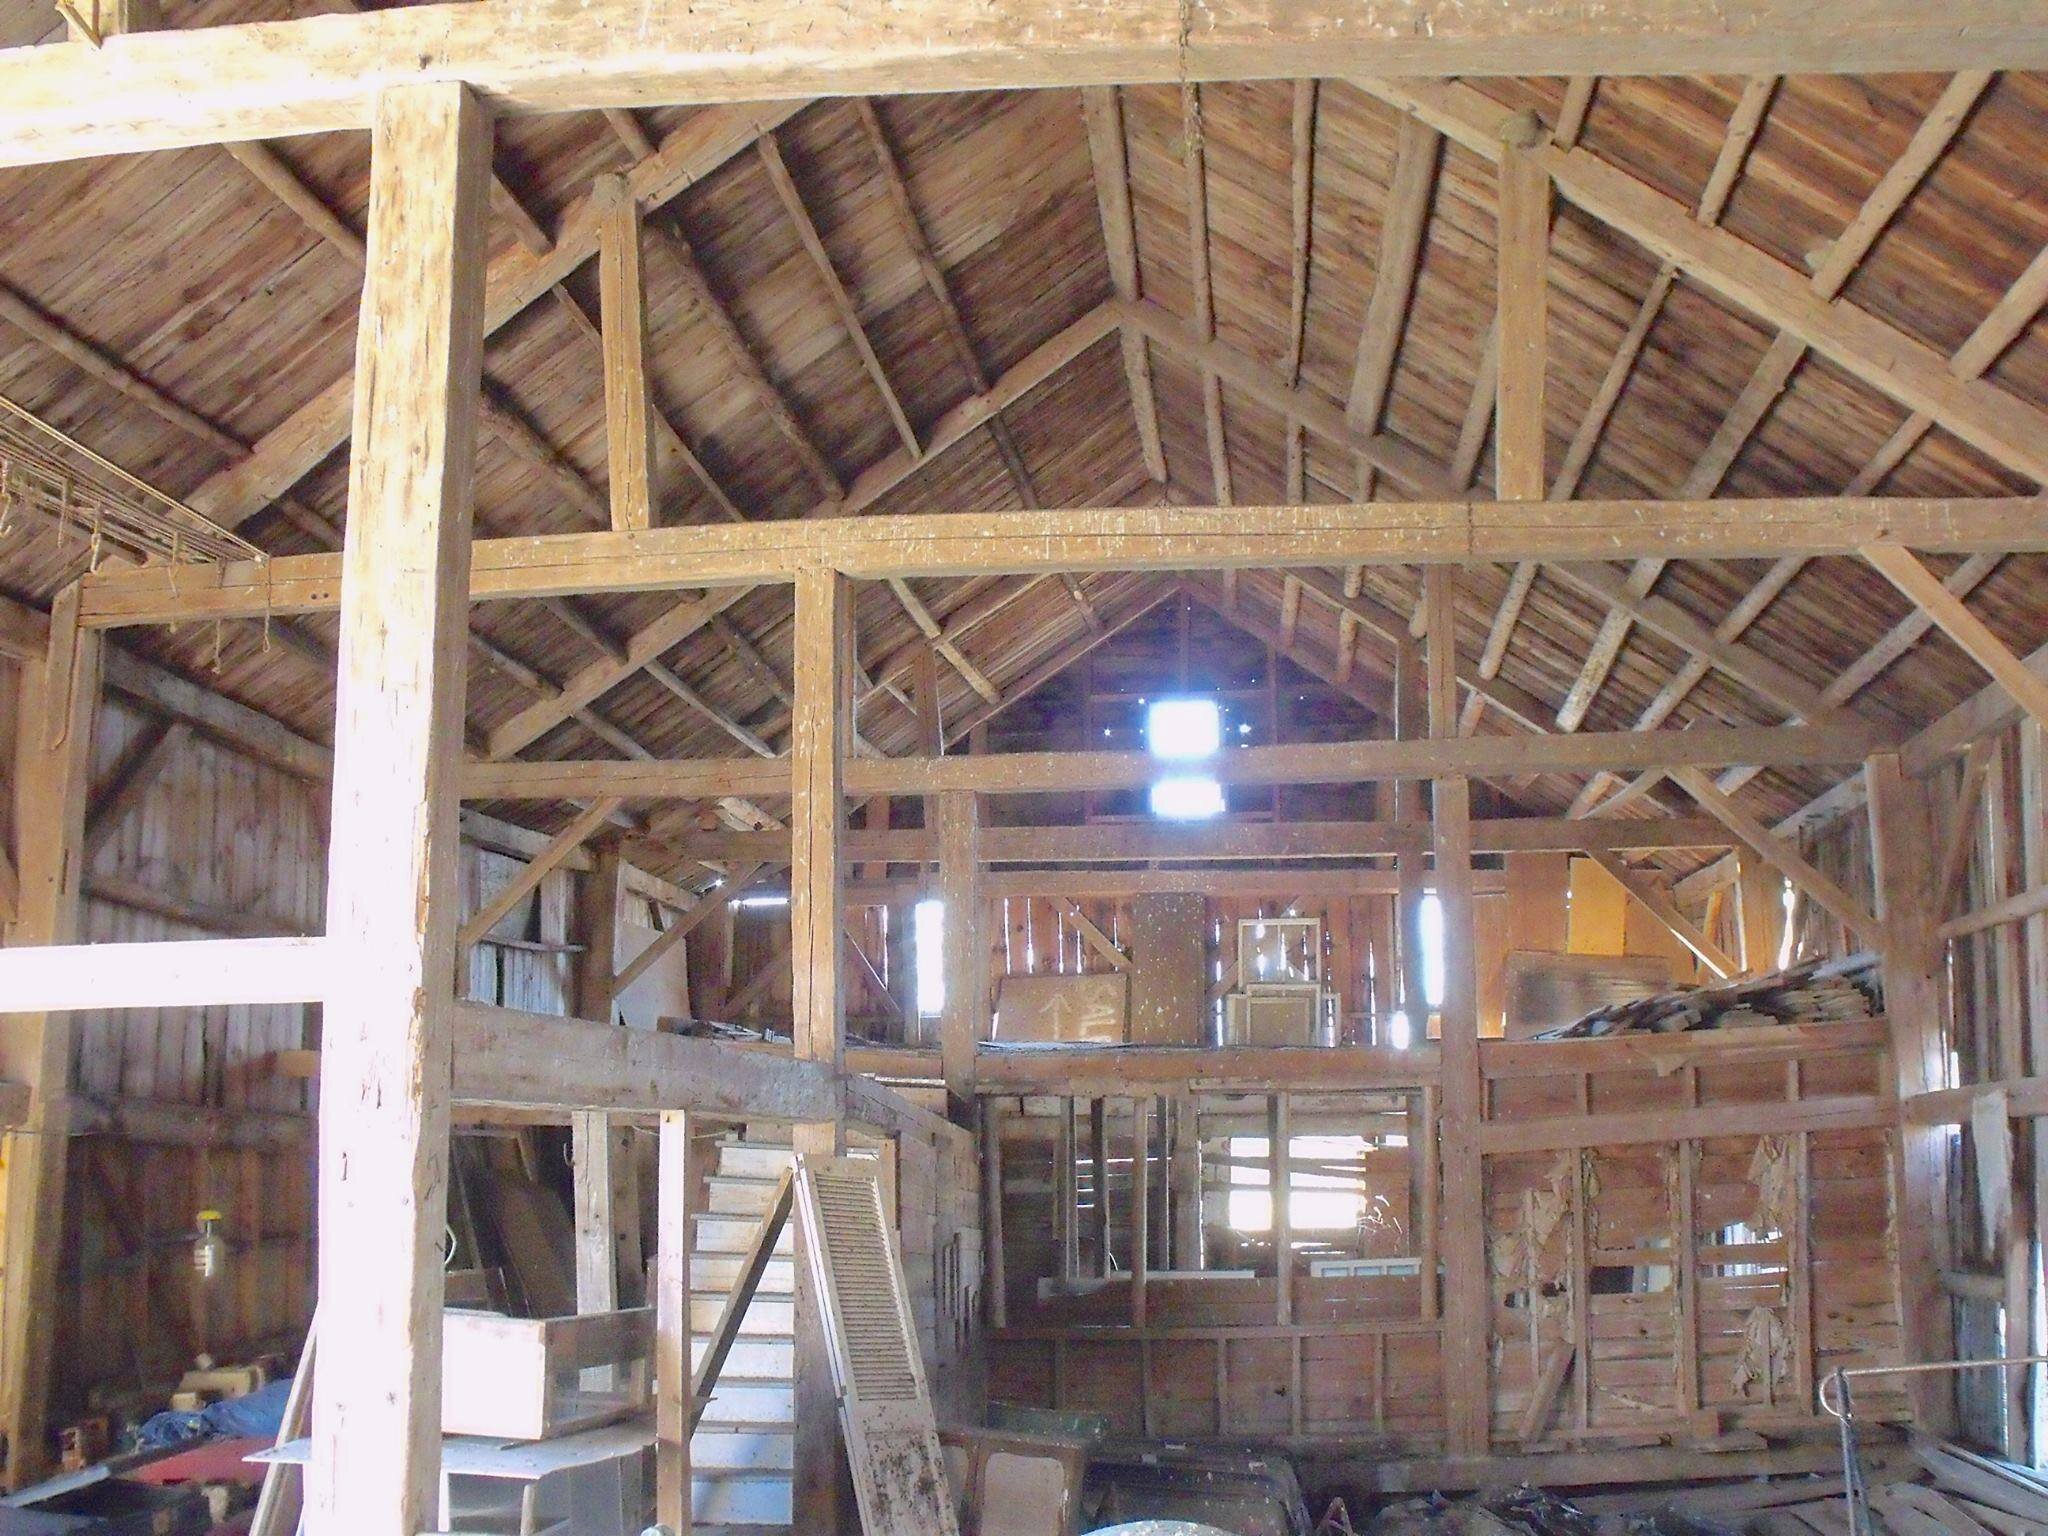 Interior of barn as found in Enfield NH